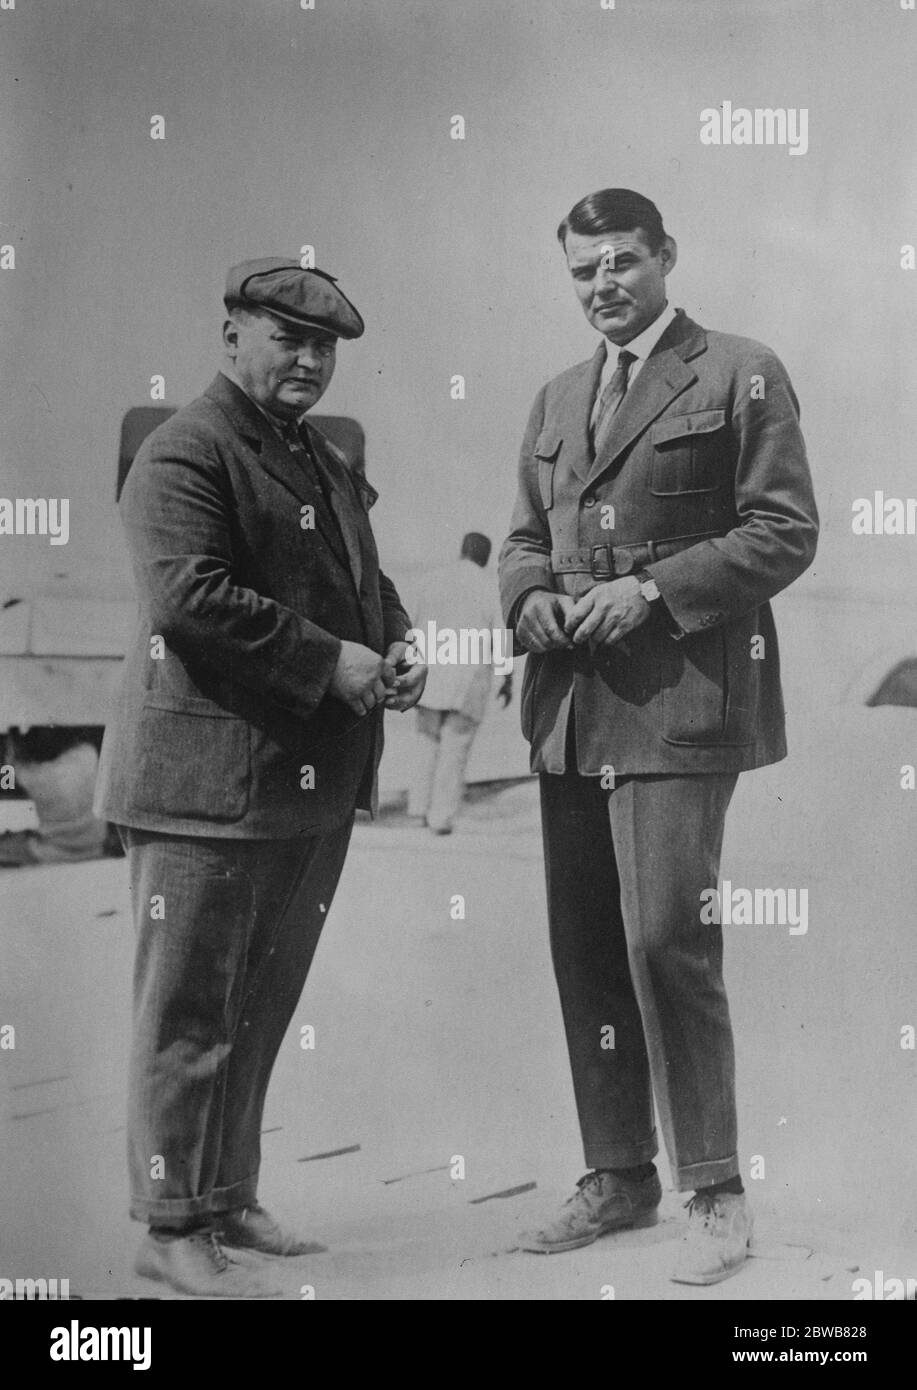 The Italian round - the - world flight . Signor Hemmer ( left ) and Mr R Larsen , who are accompanying Signor Antonio Locatelli the Italian aviator , on his round - the - world flight in a Dornier Wal seaplane . The party left Pisa on July 24 and are due in London on Saturday . 24 July 1924 Stock Photo